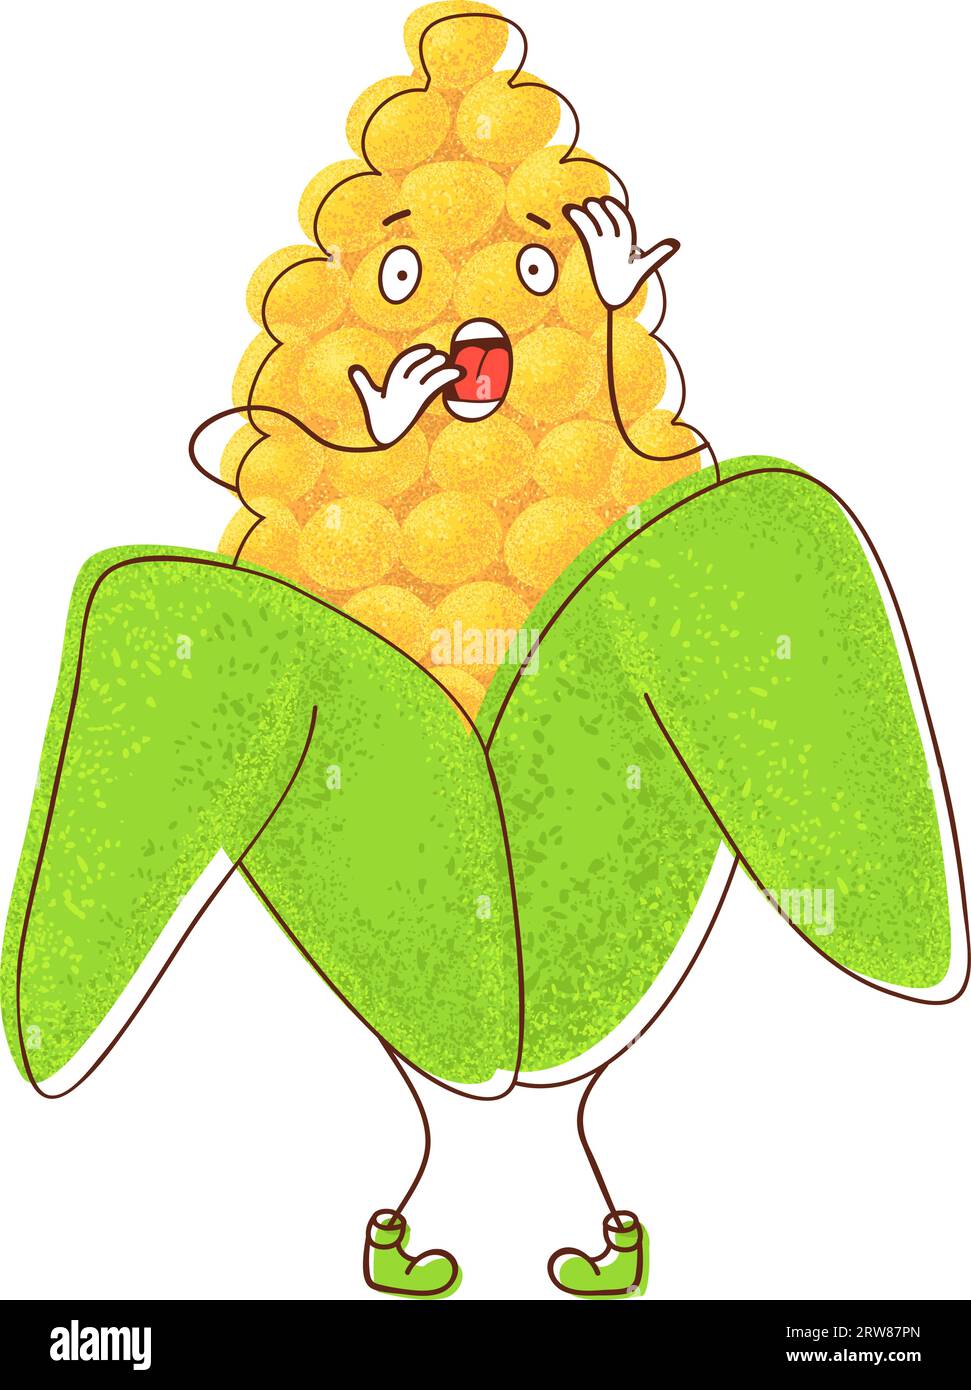 An image capturing the essence of a surprised or shocked corn character. The corn appears amazed and wide-eyed, adding a sense of unexpected wonder to Stock Vector